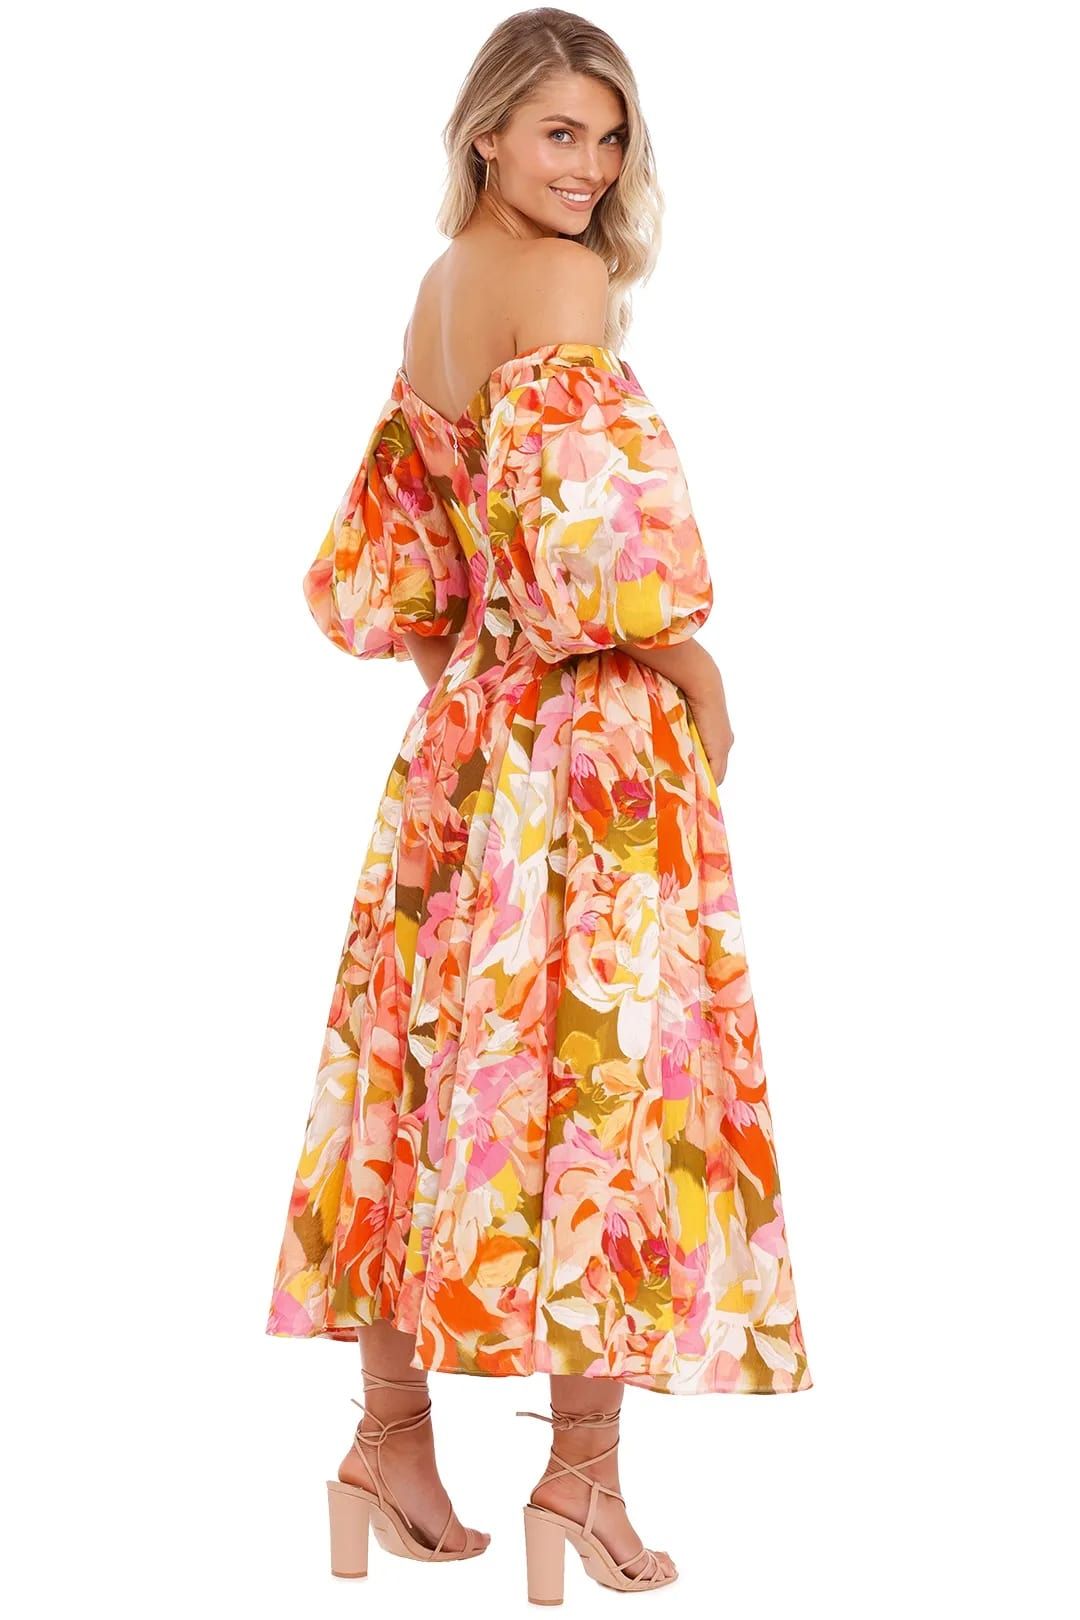 Porter dress in pink bouquet for formal events.